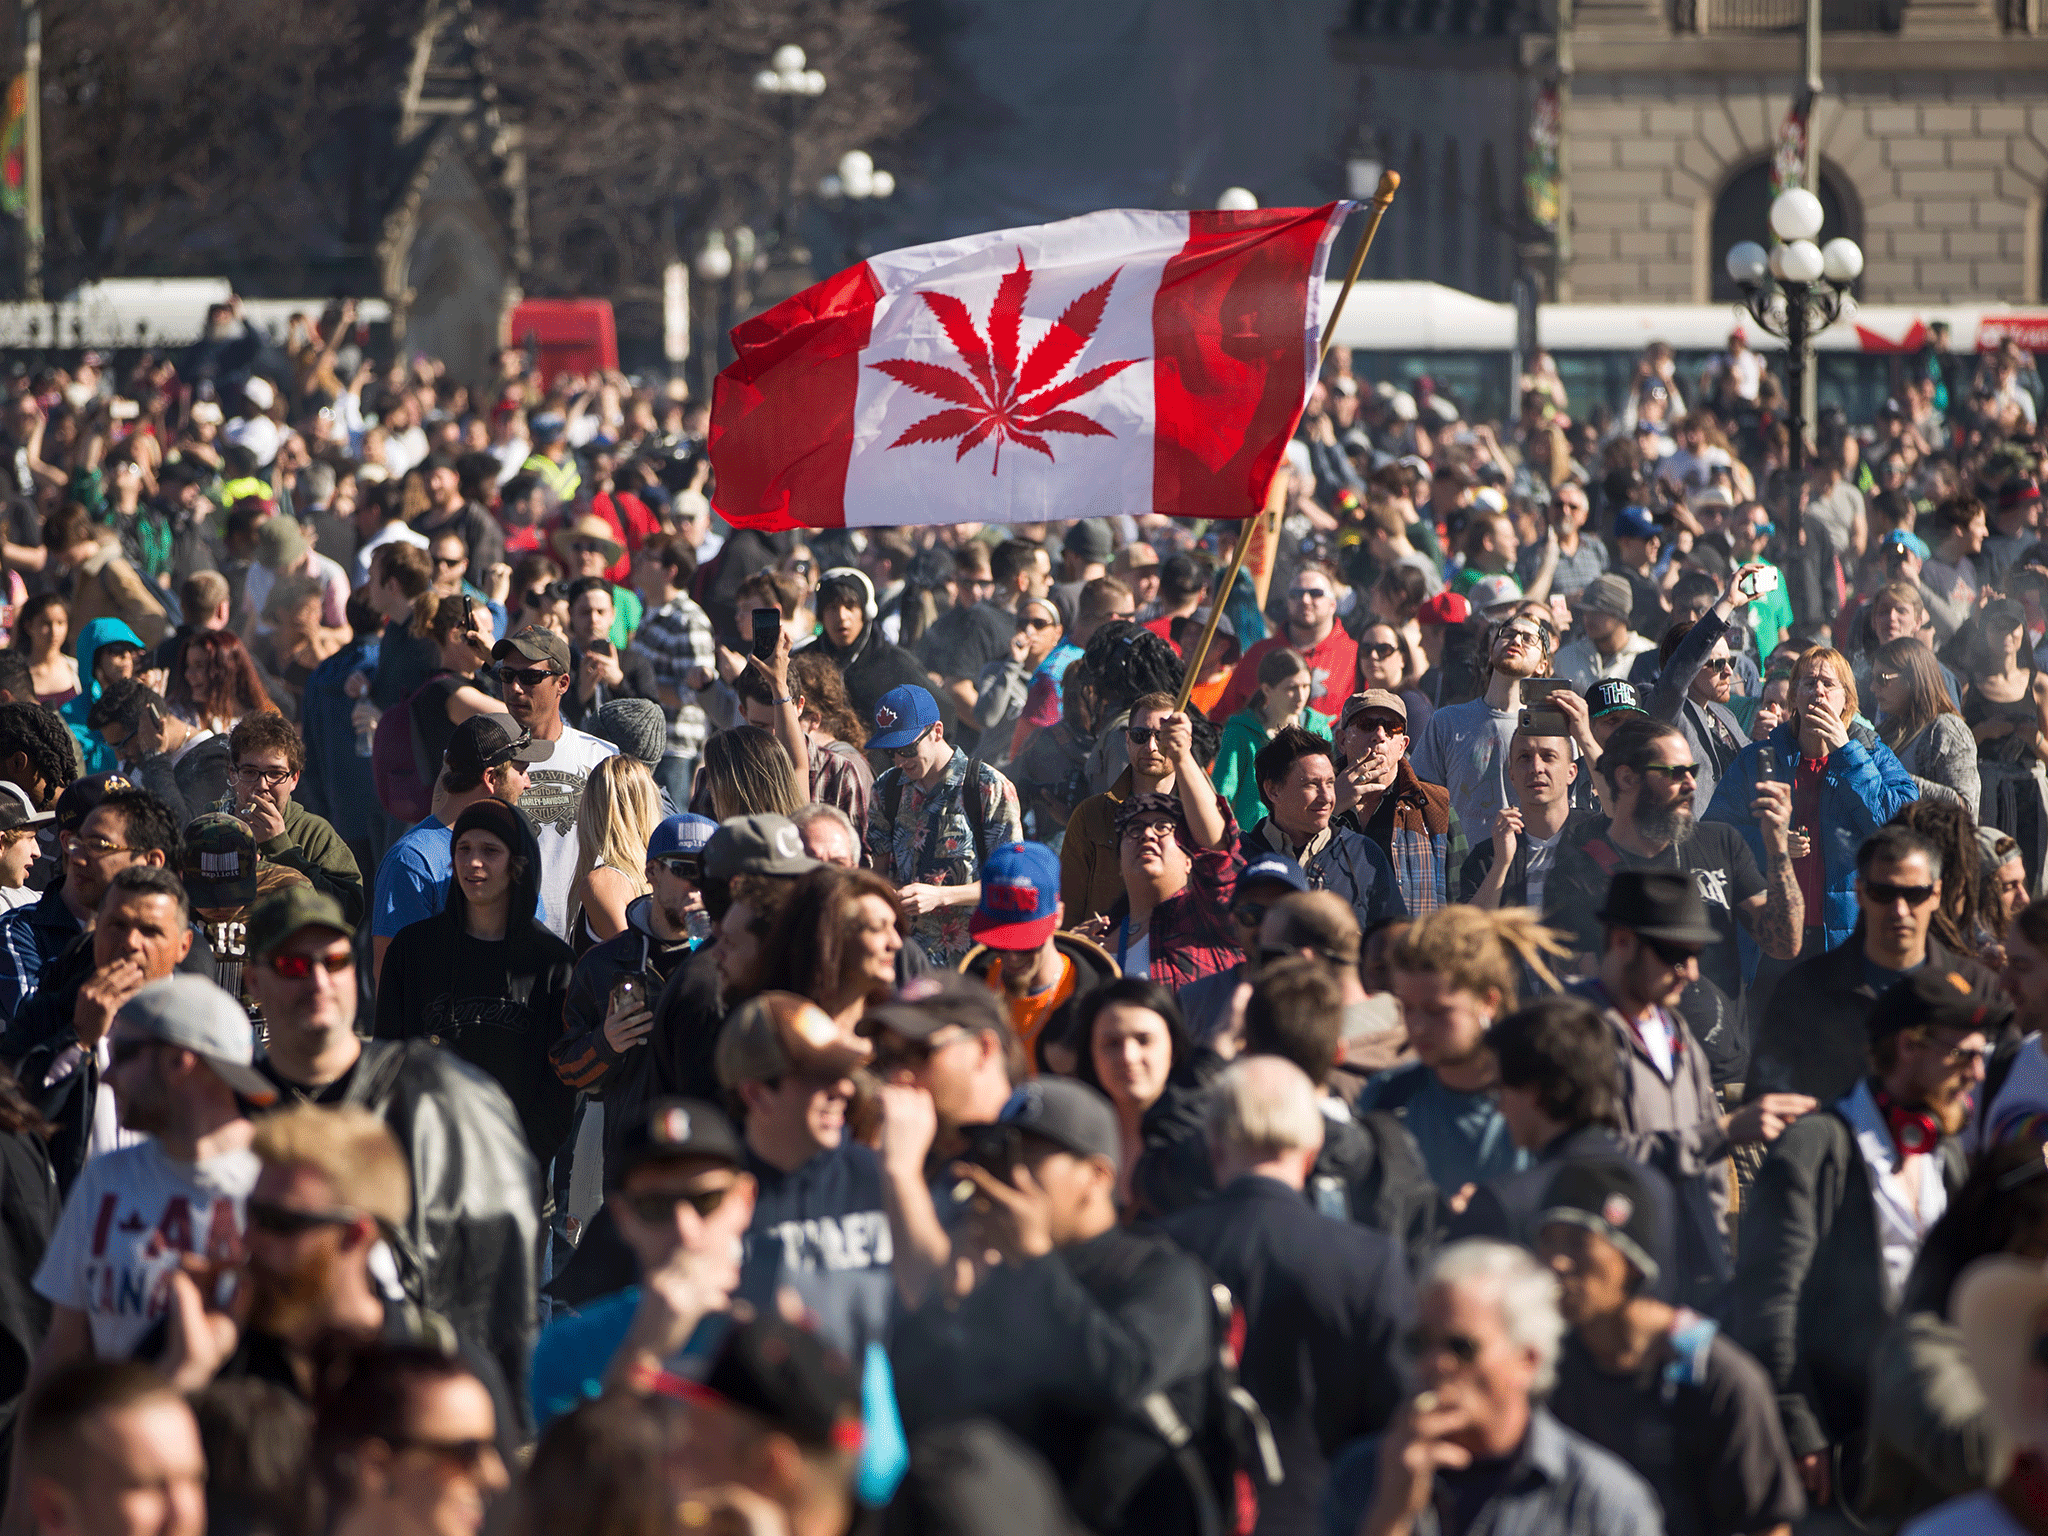 Canada would become the first G7 nation to completely legalise the recreational use of cannabis